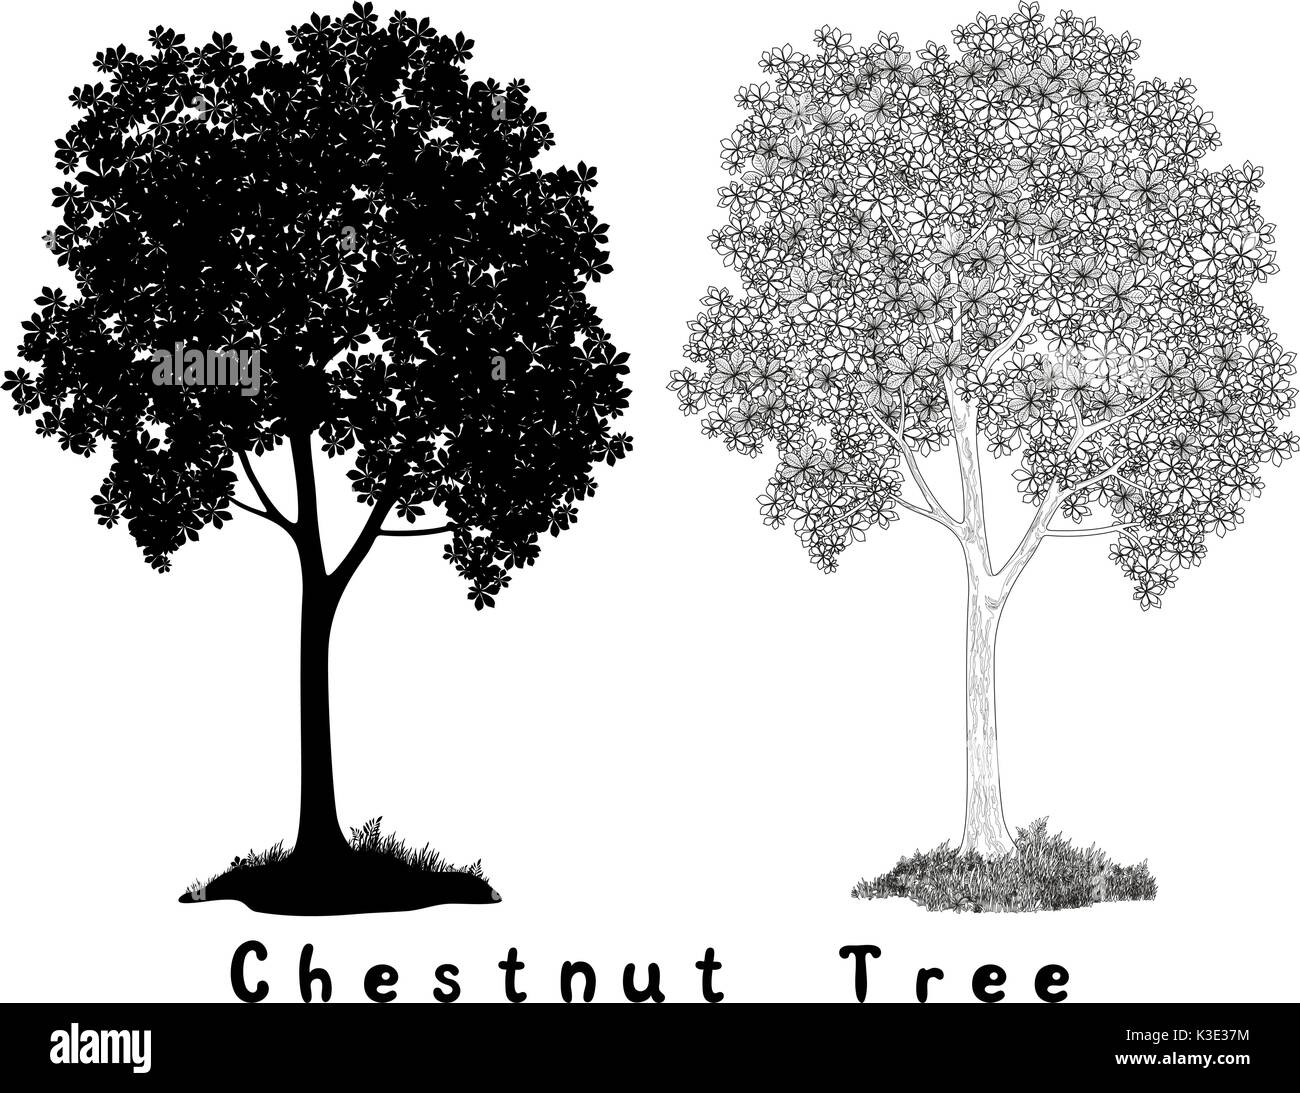 Chestnut tree Silhouette Contours and Inscriptions Stock Vector